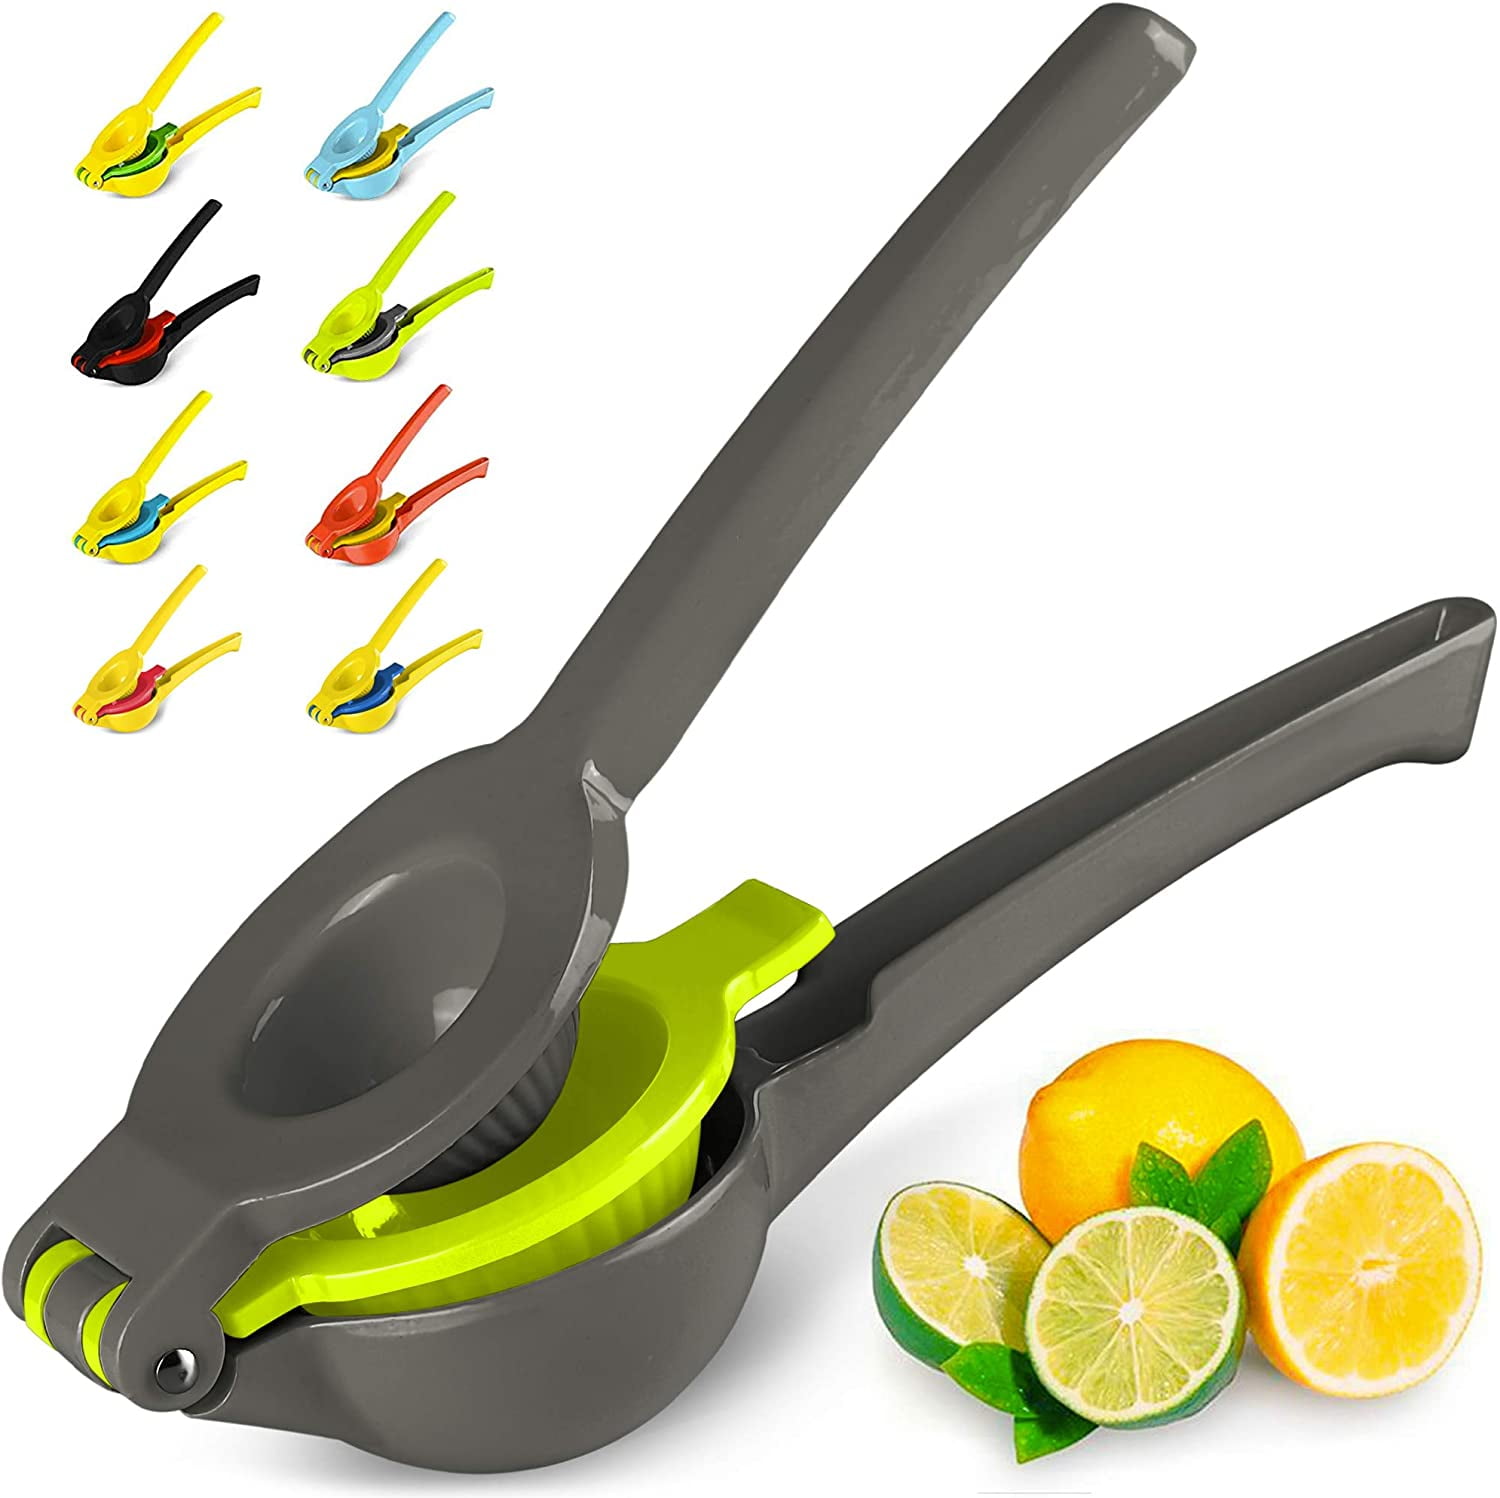 Top Rated Zulay Premium Quality Metal Lemon Lime Squeezer - Manual